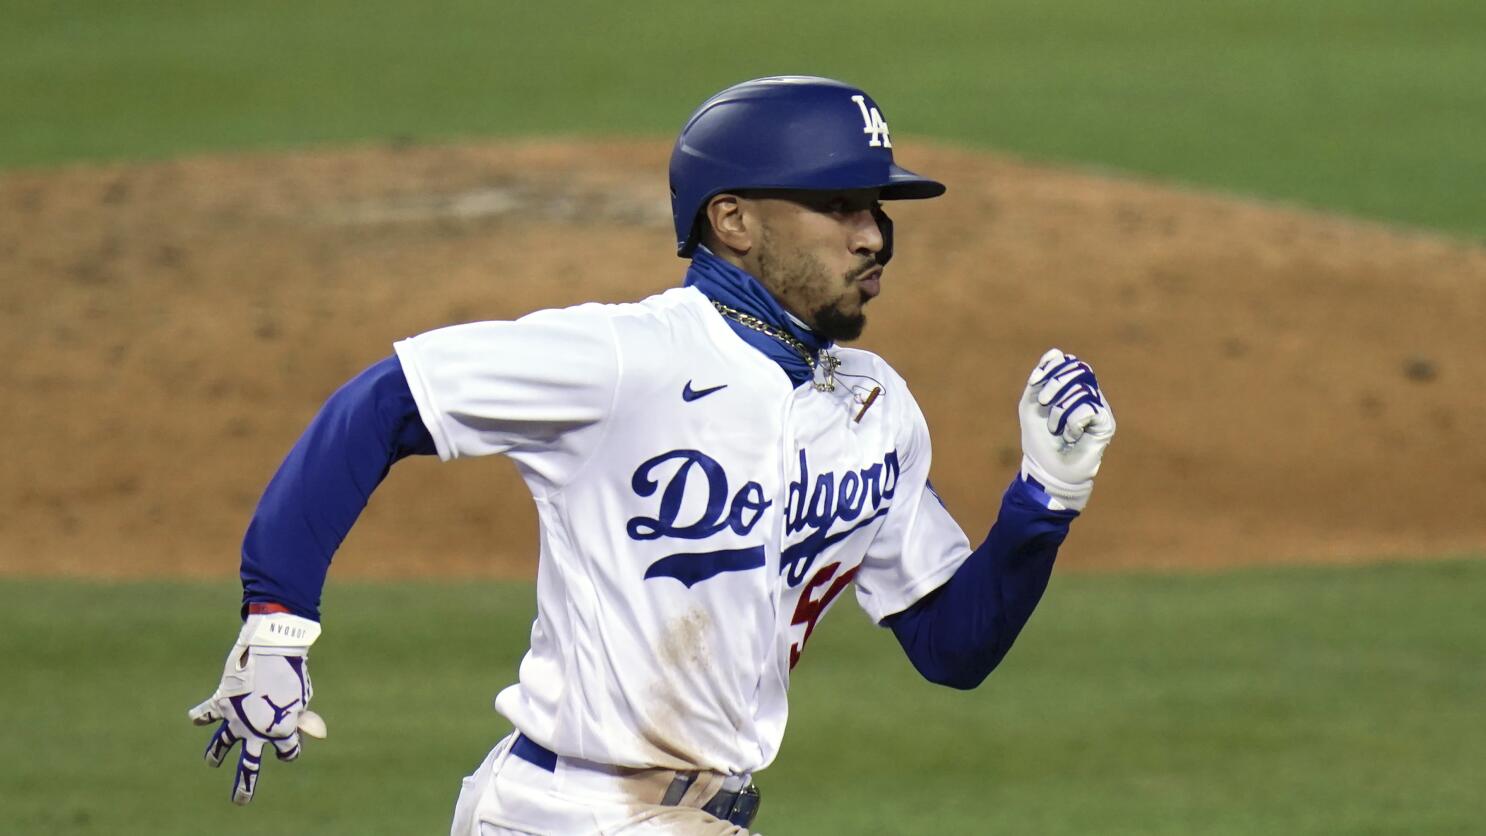 Mookie Betts held out of Dodgers lineup after hit by pitch - The